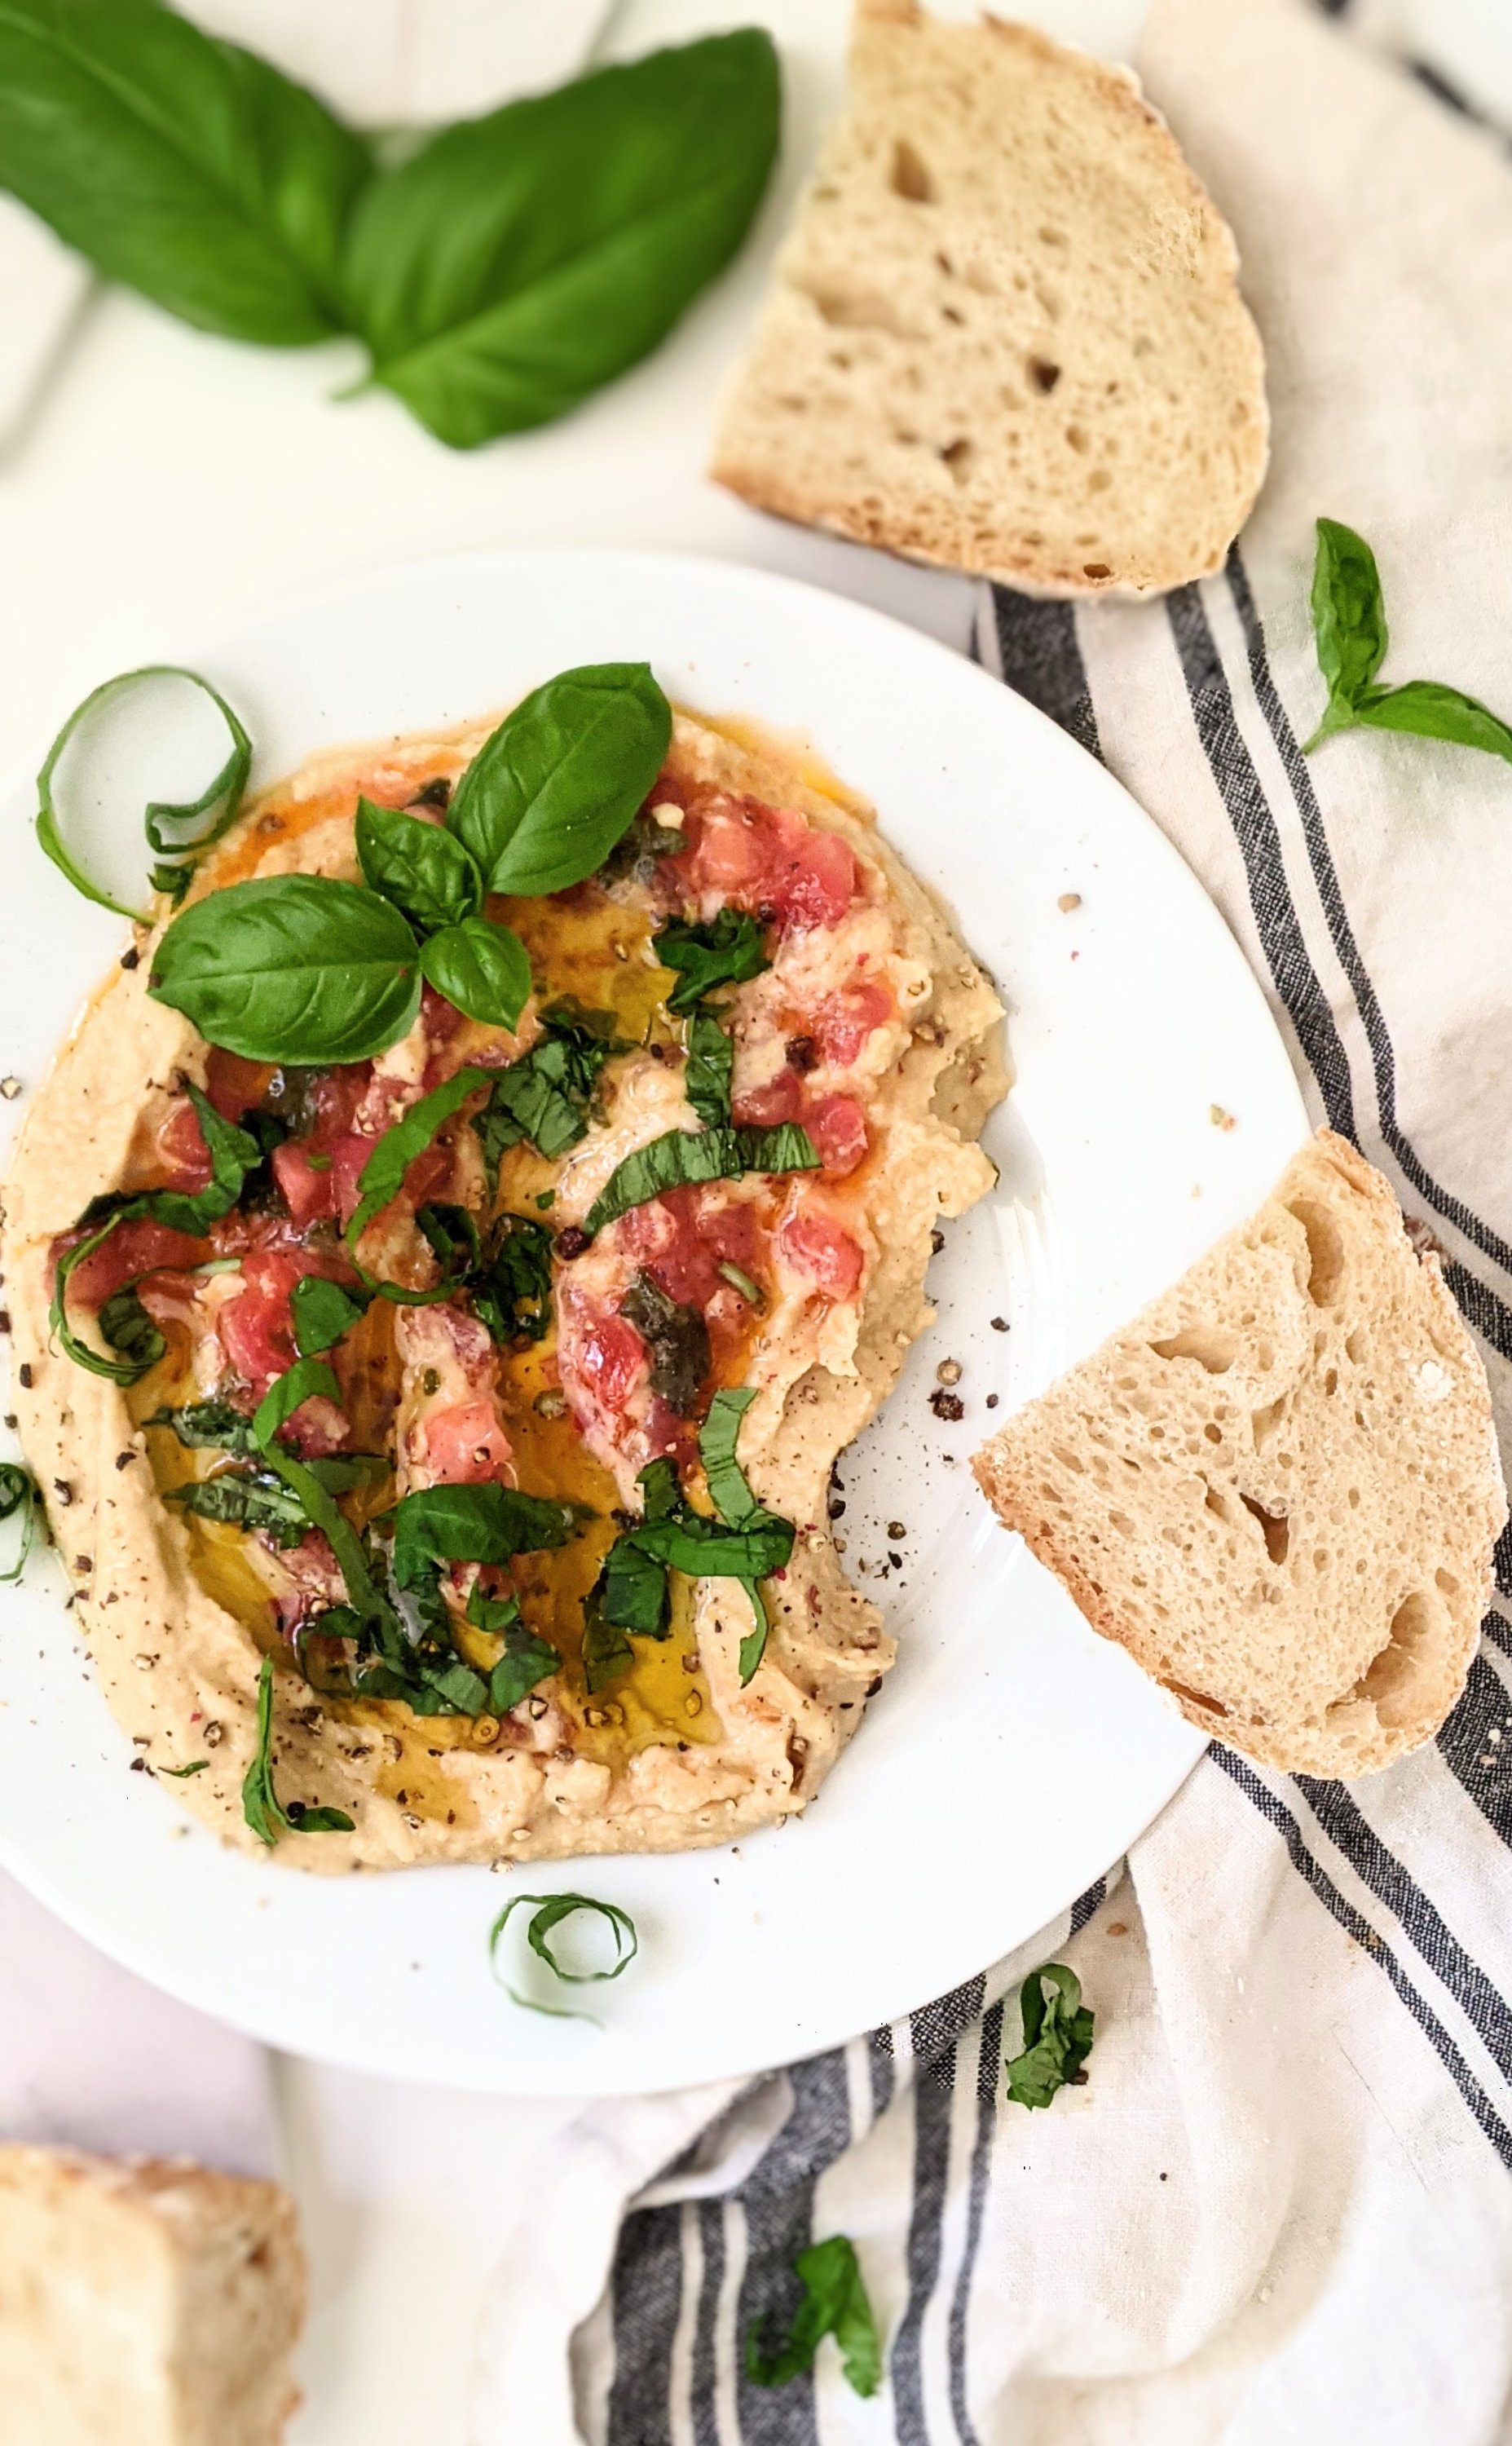 bruschetta hummus recipe vegan gluten free plant-based summer side dishes no cook appetizers for entertaining dinner side dishes with tomato bruschetta humous